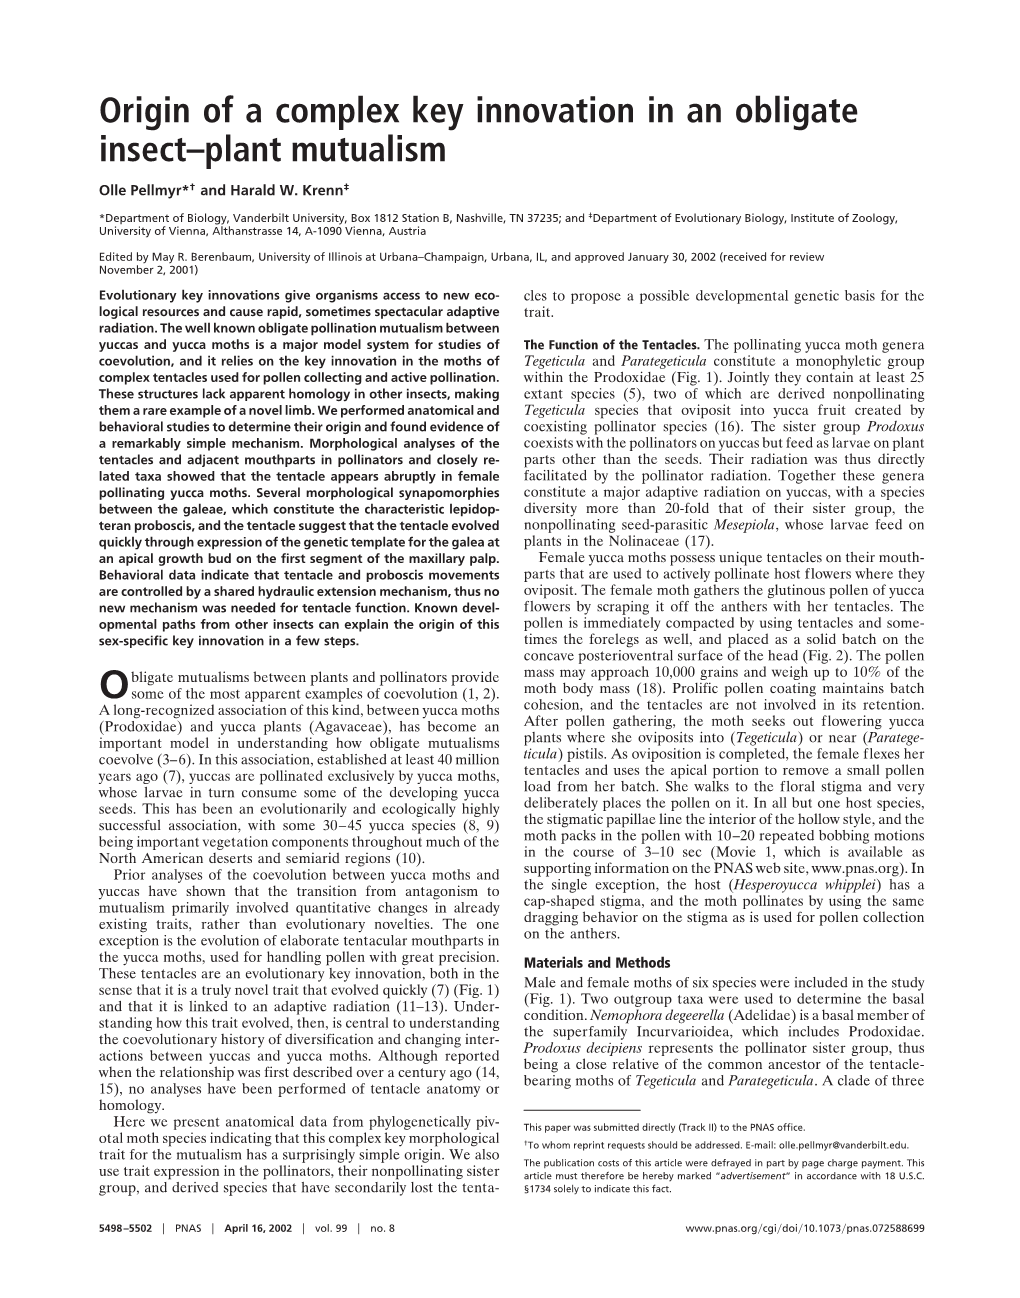 Origin of a Complex Key Innovation in an Obligate Insect–Plant Mutualism